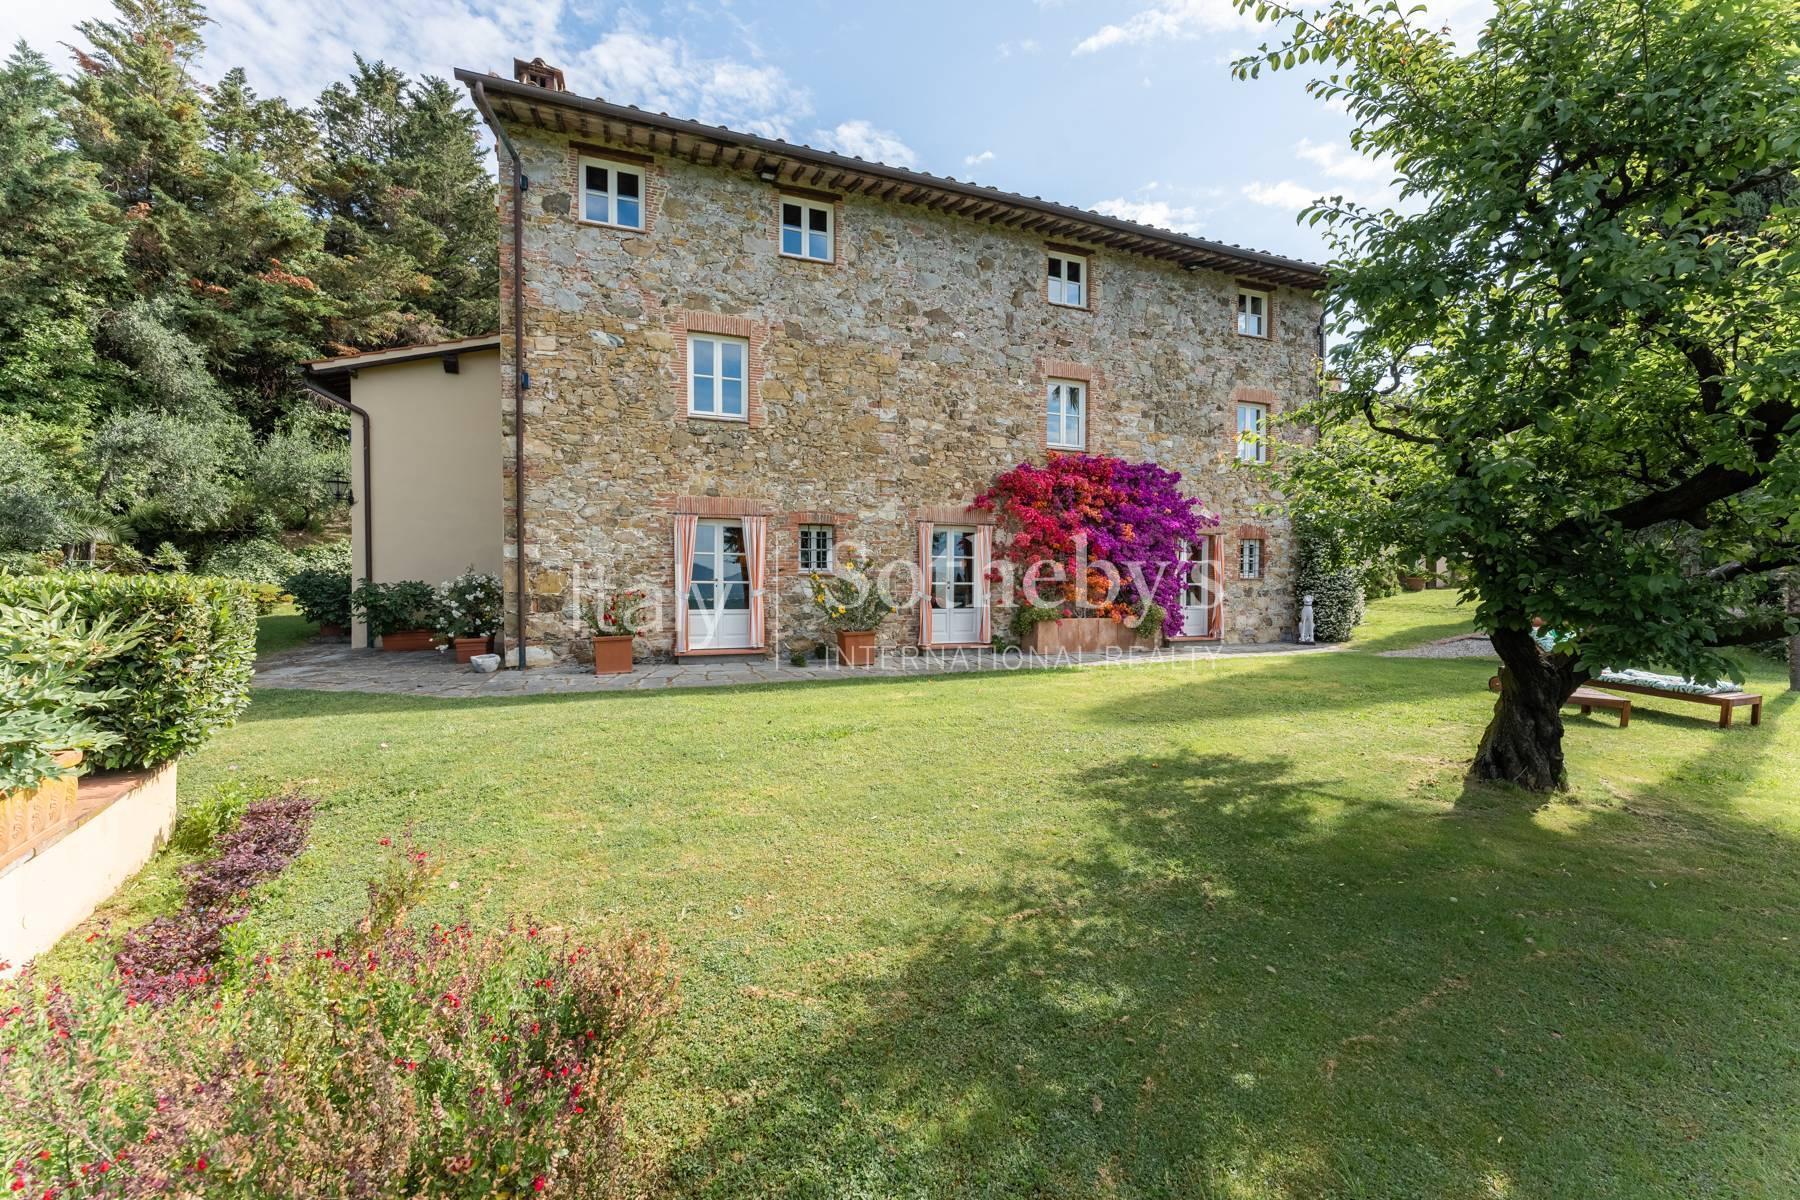 Elegant farmhouse with panoramic view over the hills of Lucca - 5